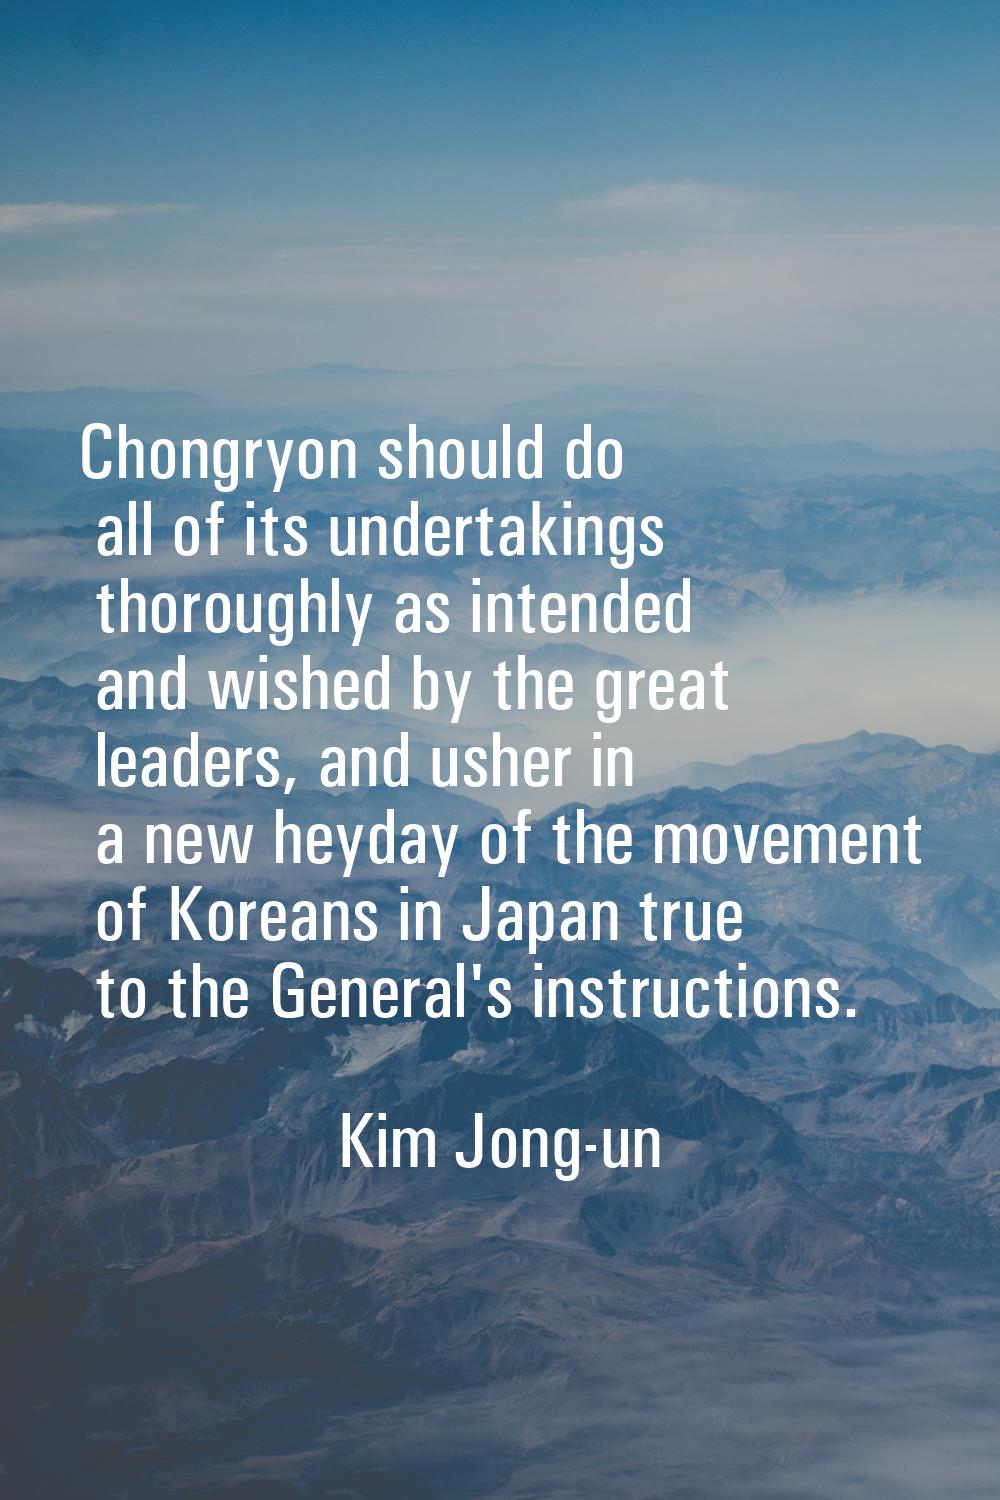 Chongryon should do all of its undertakings thoroughly as intended and wished by the great leaders,